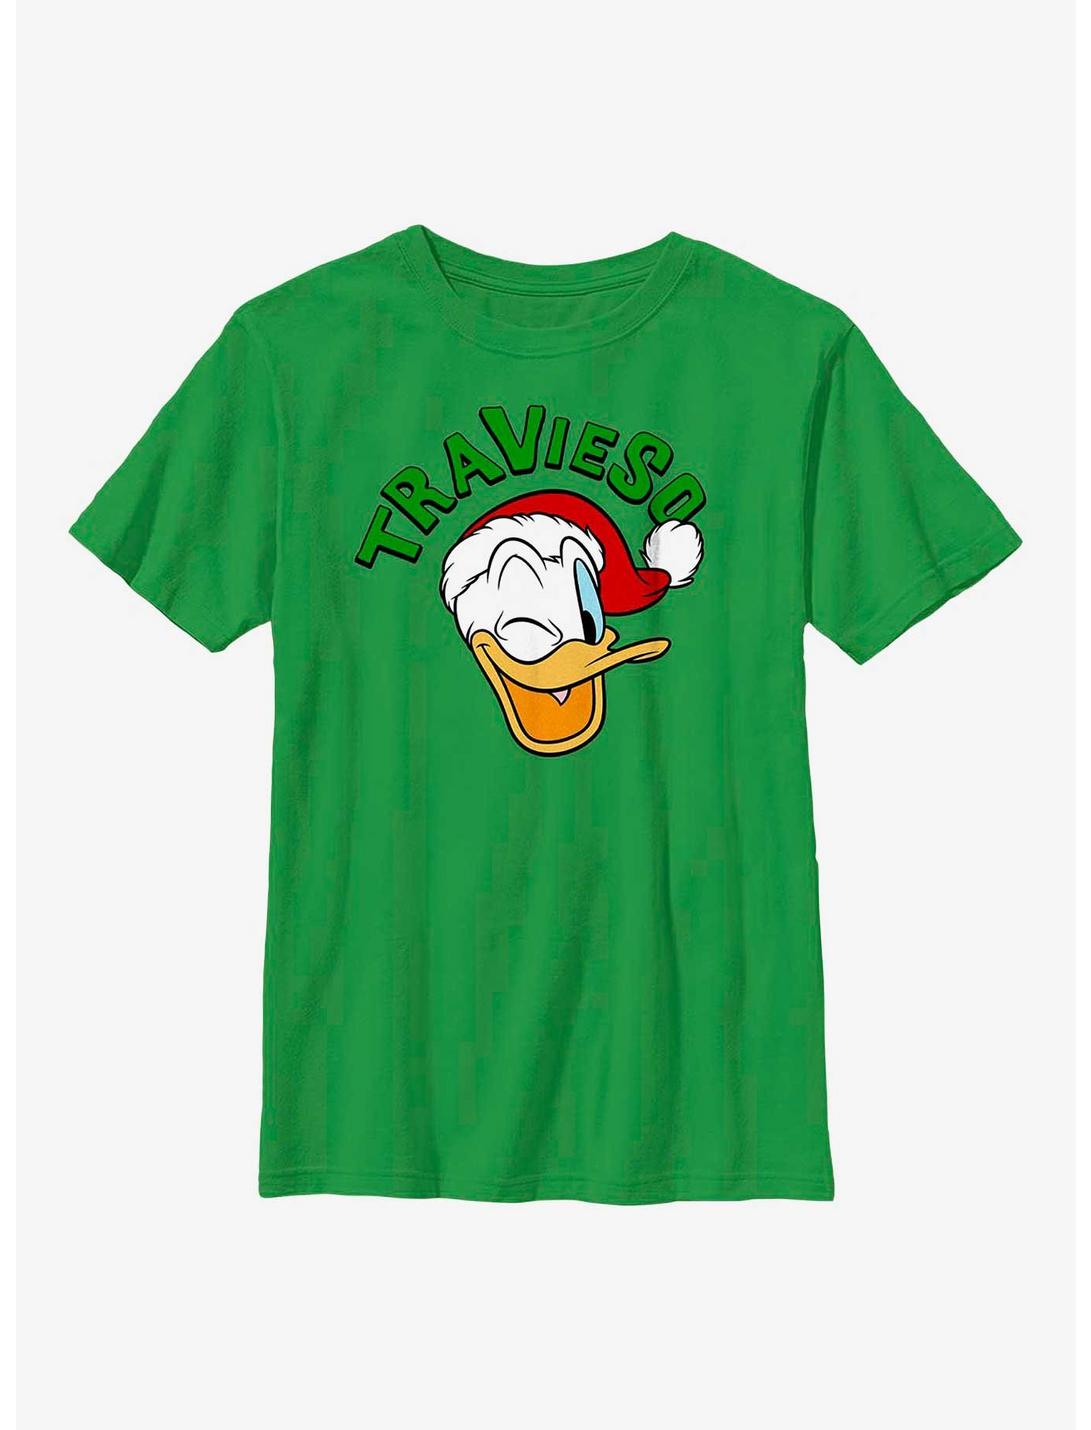 Disney Donald Duck Travieso Holiday in Spanish Youth T-Shirt, KELLY, hi-res